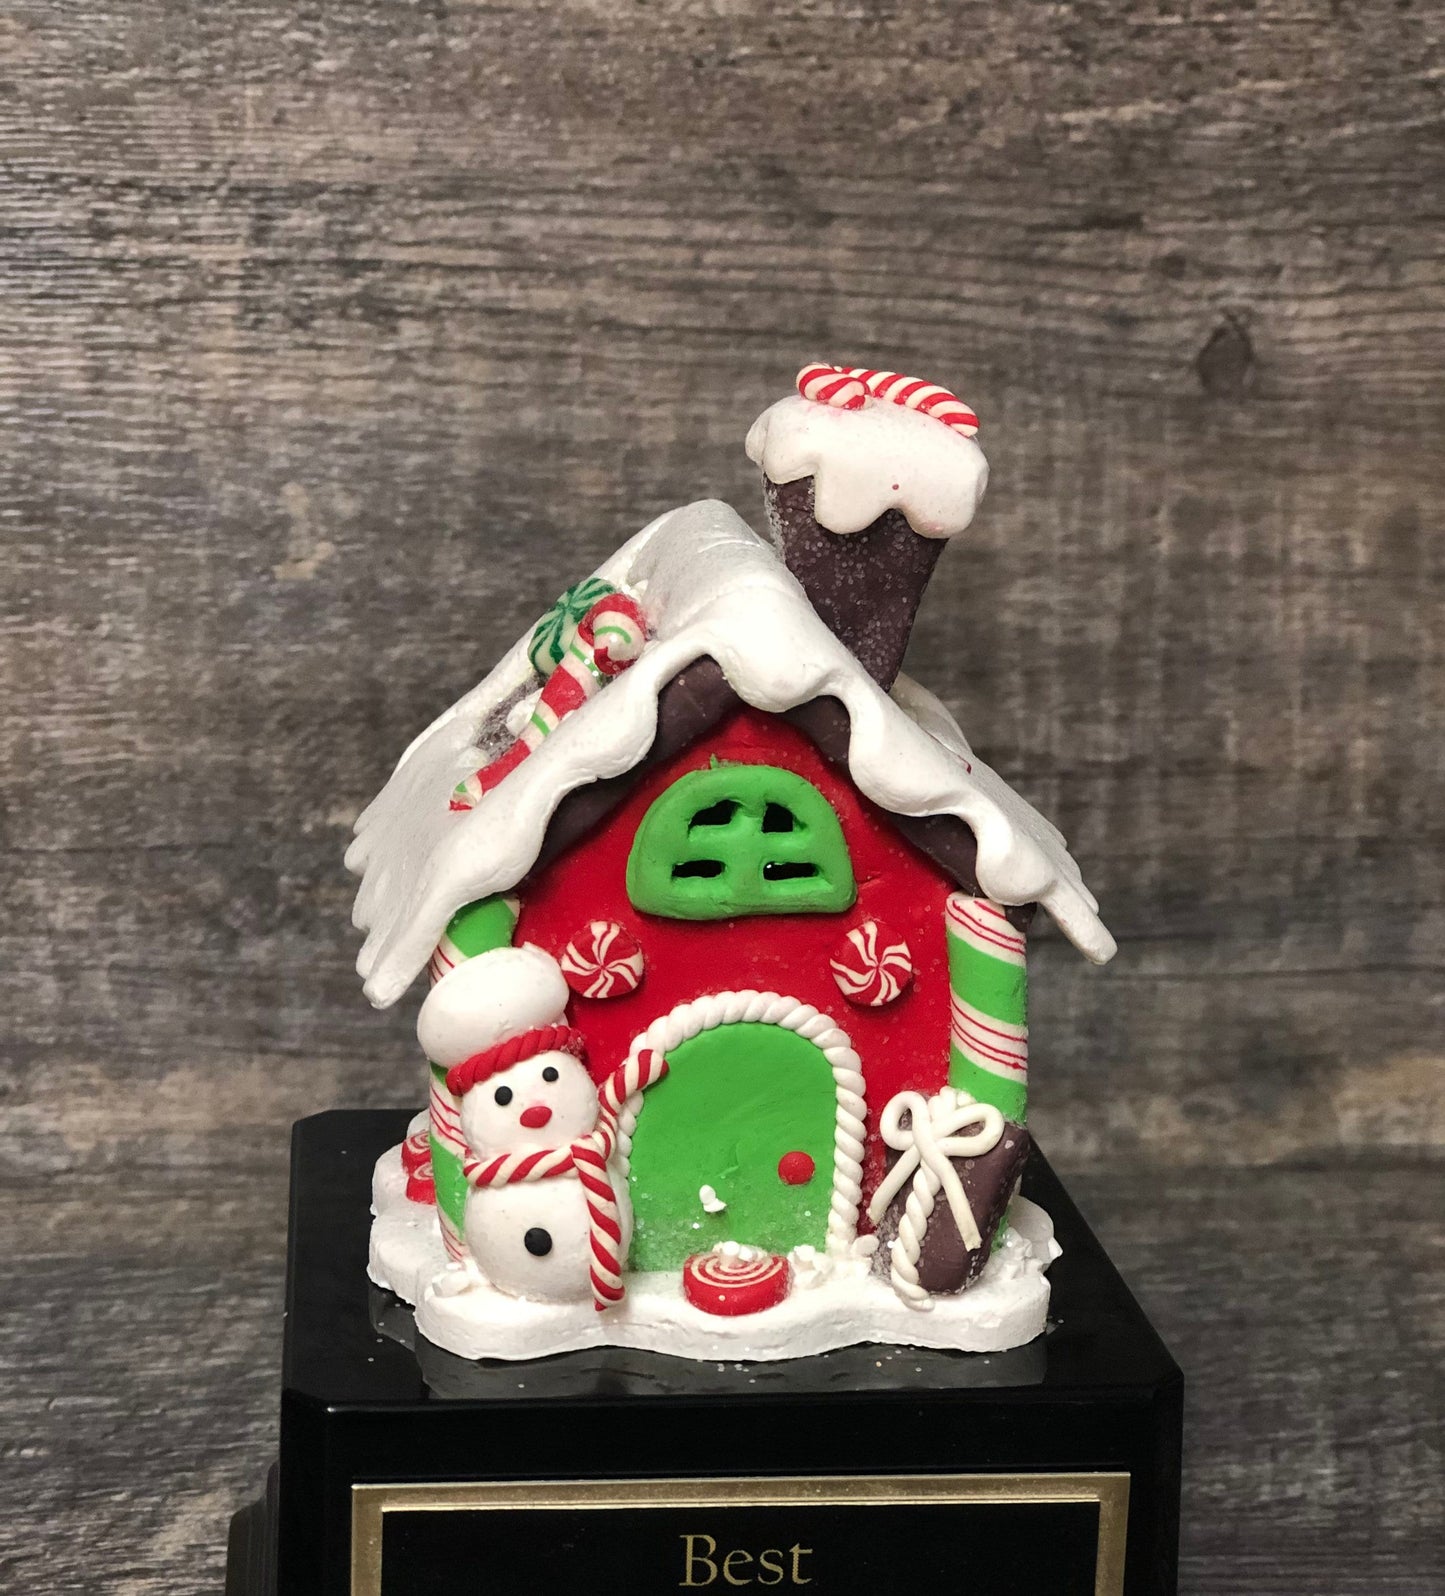 Gingerbread House Cookie Bake Off Trophy Ugly Sweater Trophy Contest Award Winner Christmas Cookie Decorating Holiday Party Snowman Decor